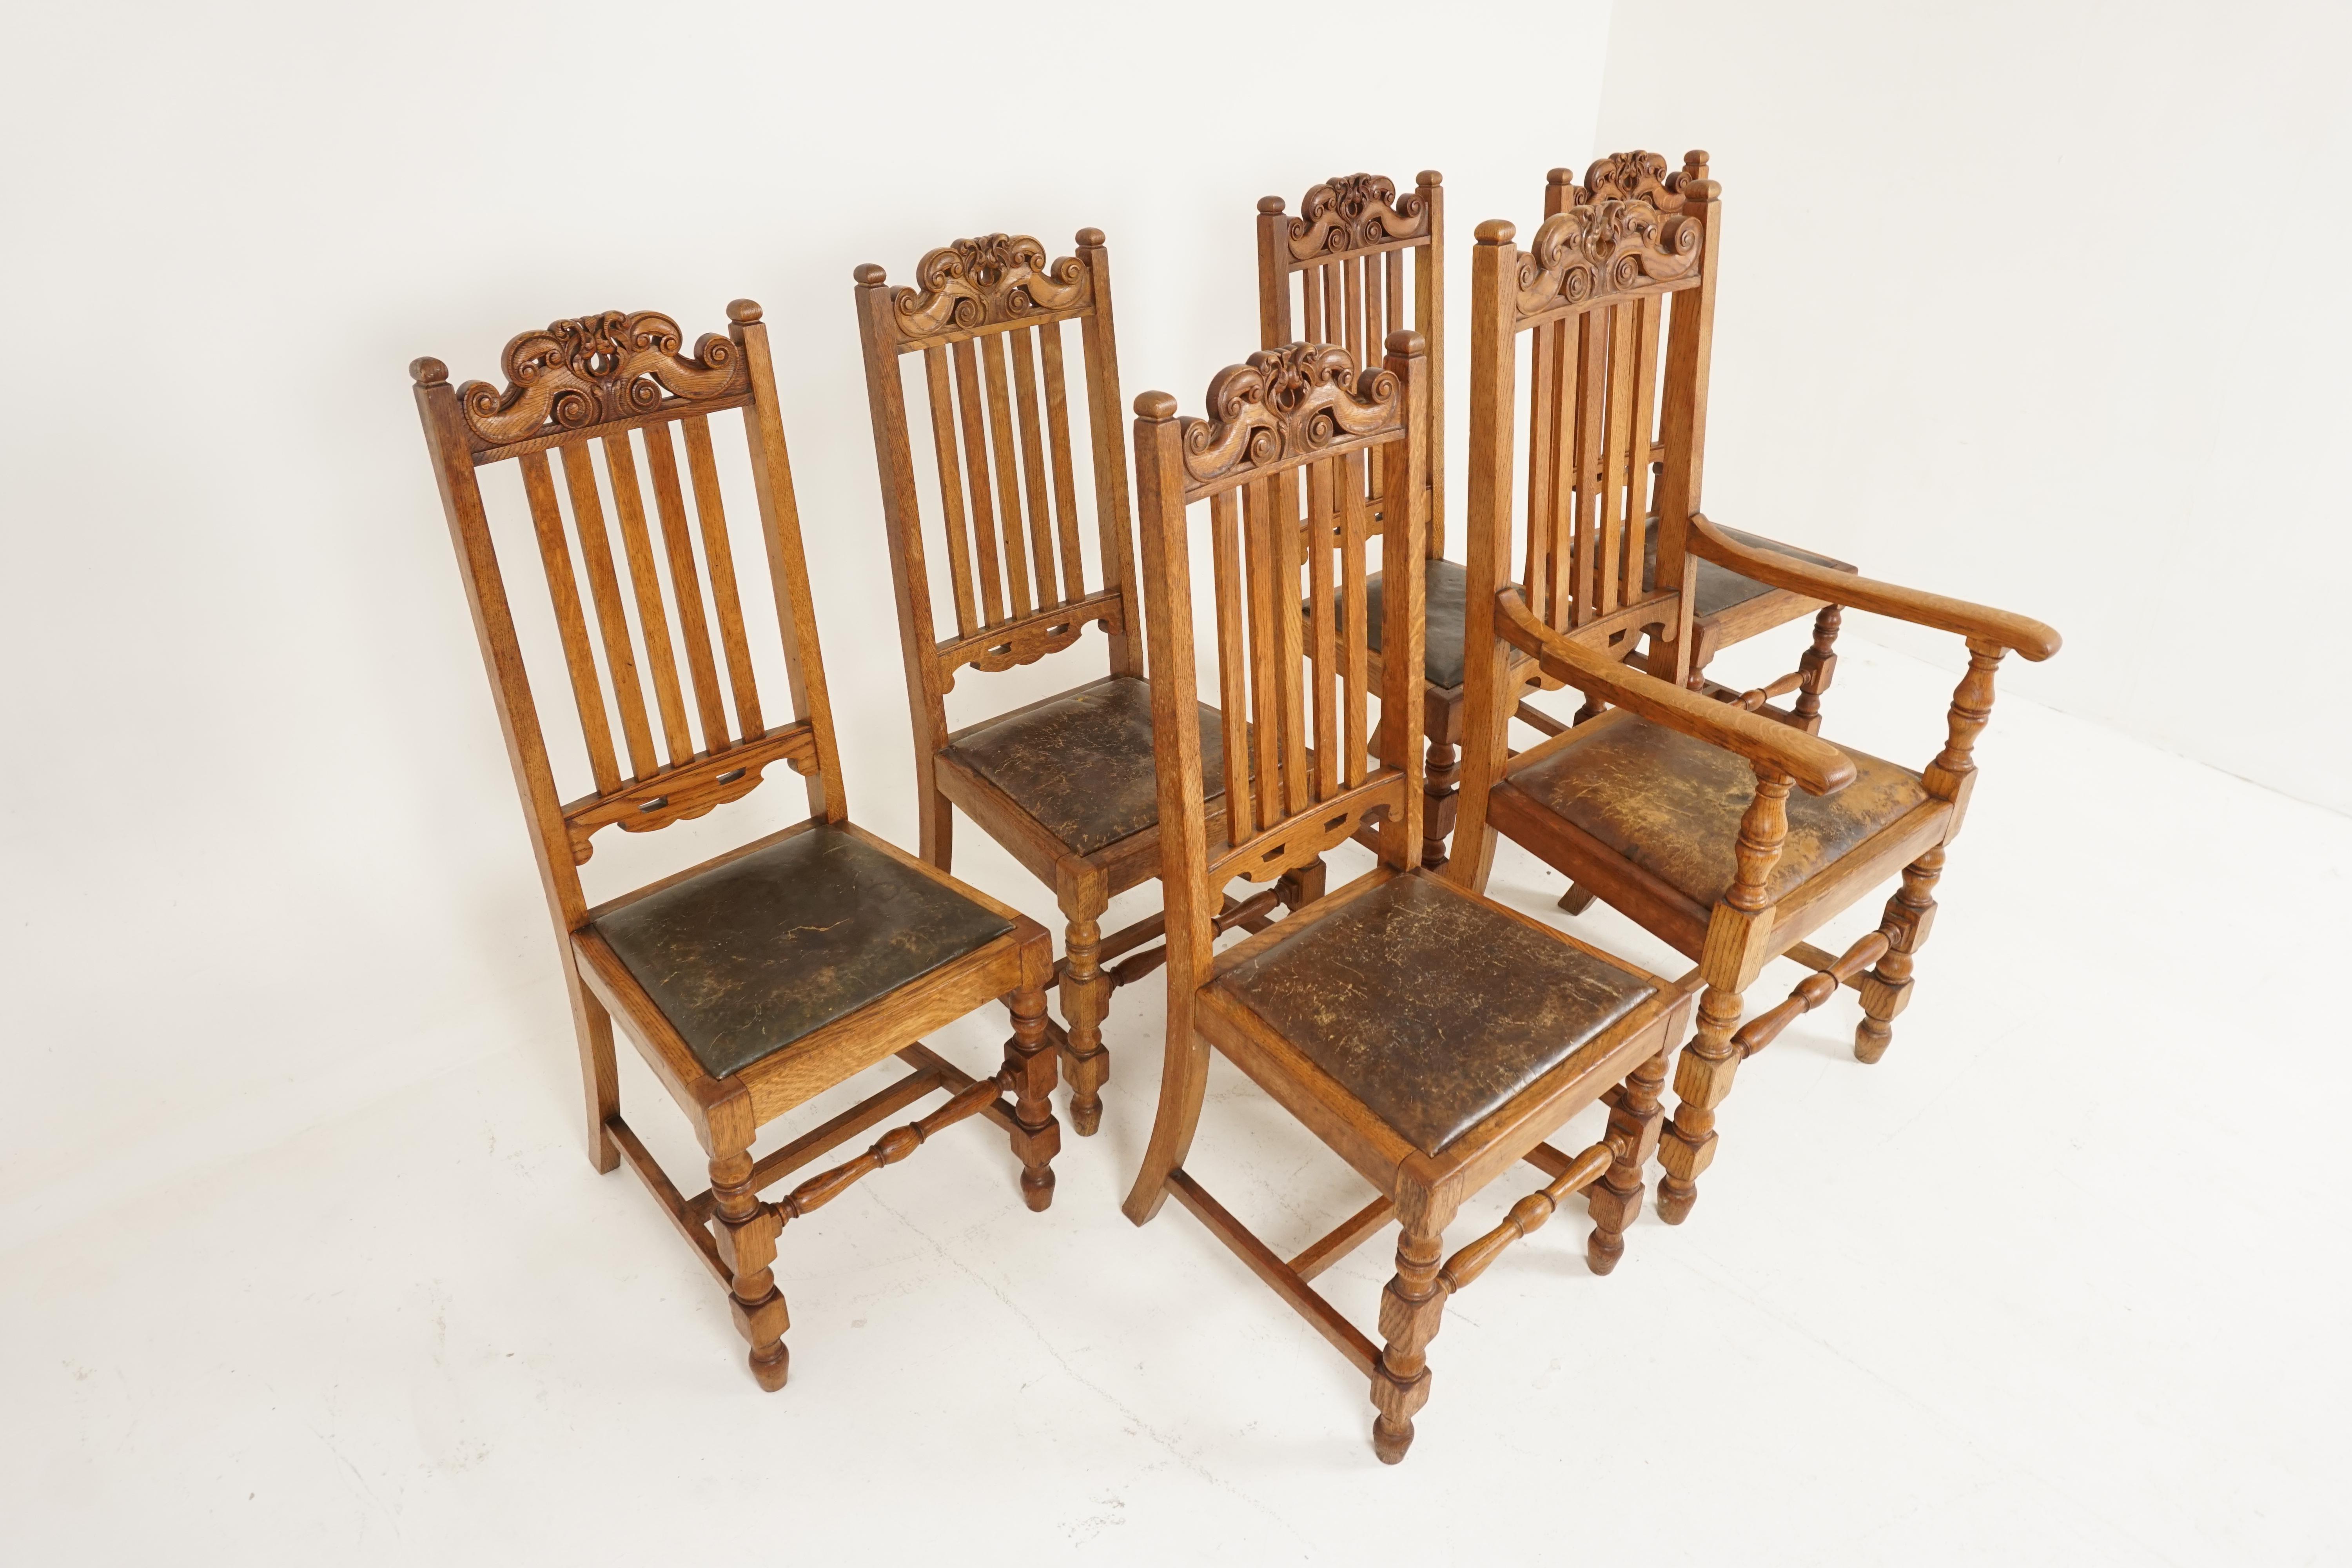 6 antique carved oak Arts & Crafts dining chairs, Scotland 1910, B2417

Scotland, 1910
Solid oak
Original finish
Having carved top rail above splat backs
Oak supports with finial on top
Carved lower rail above upholstered seat
Standing on